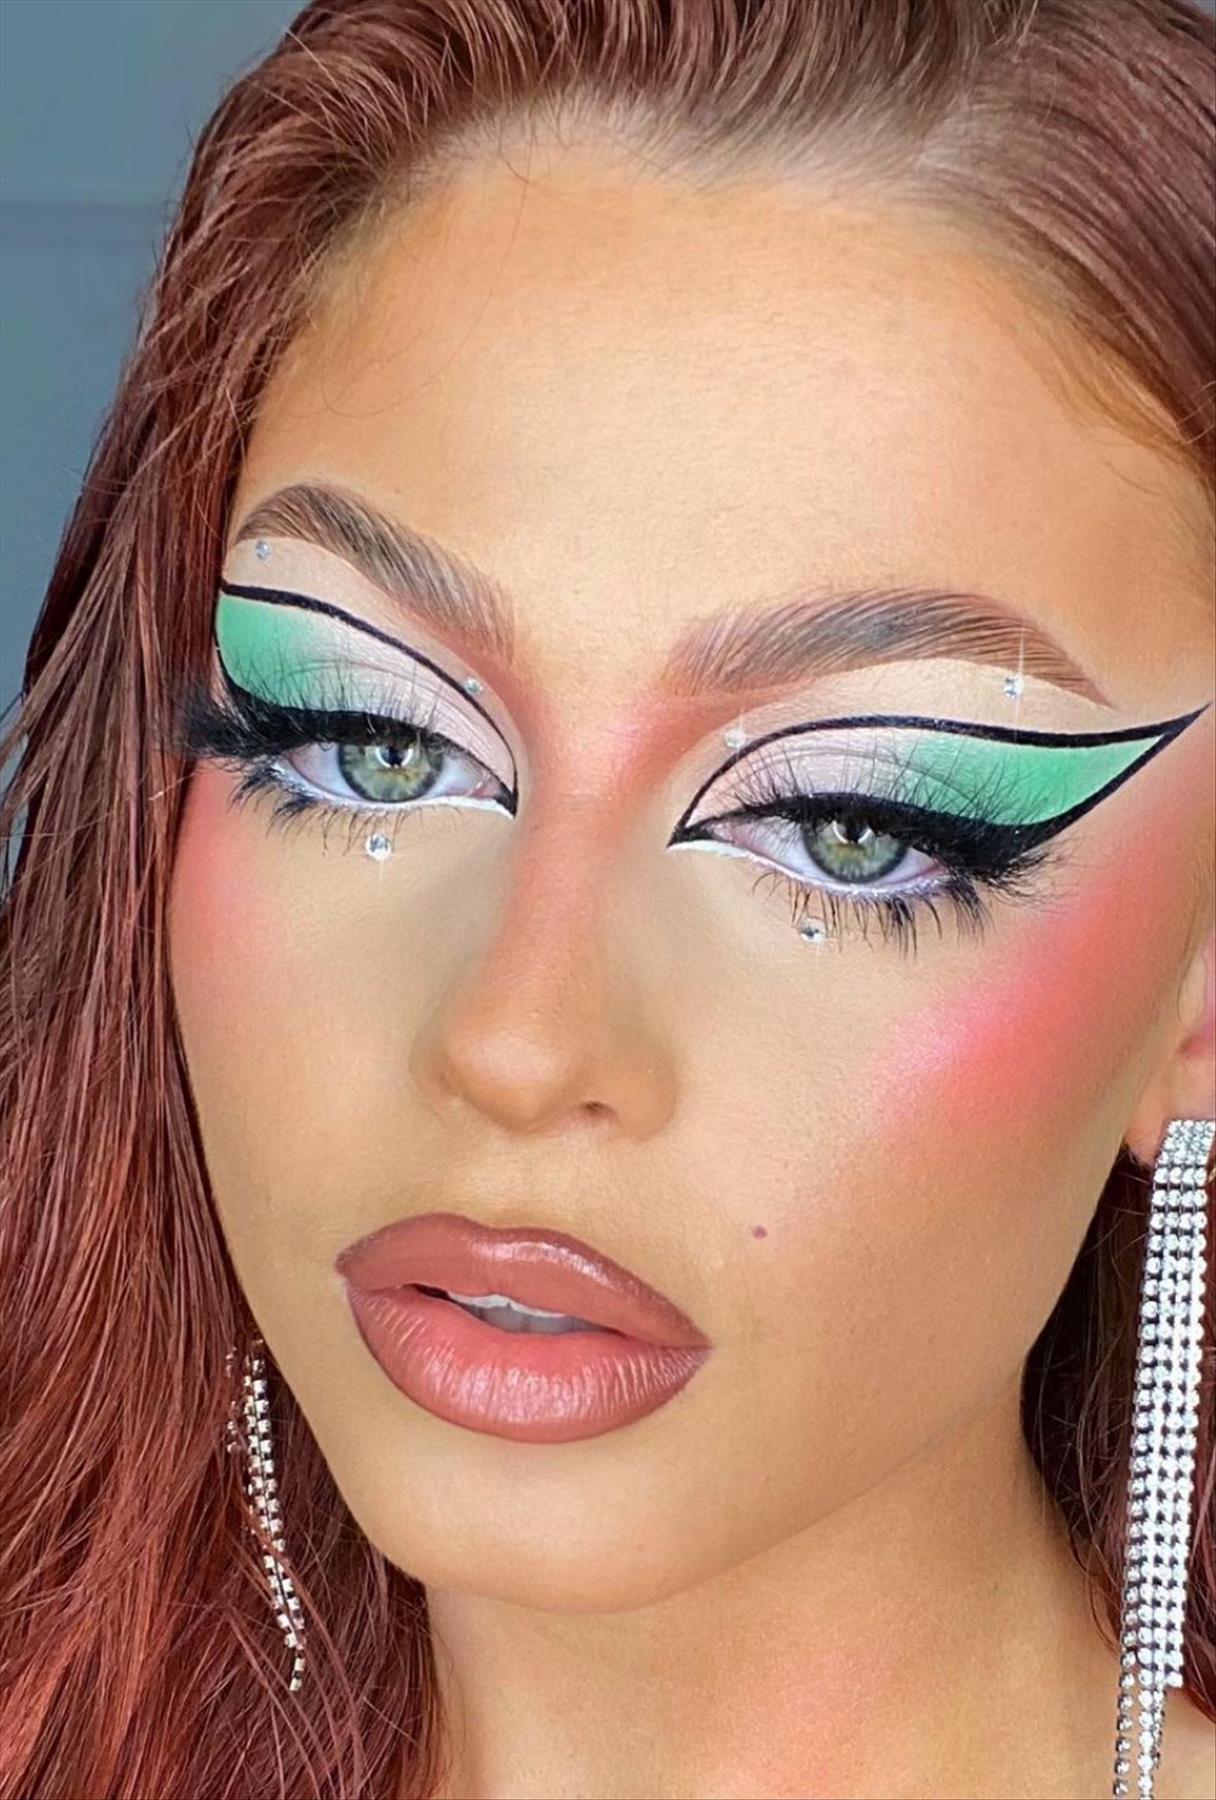 How to Rock the Green Eye Makeup Looks & Trend?